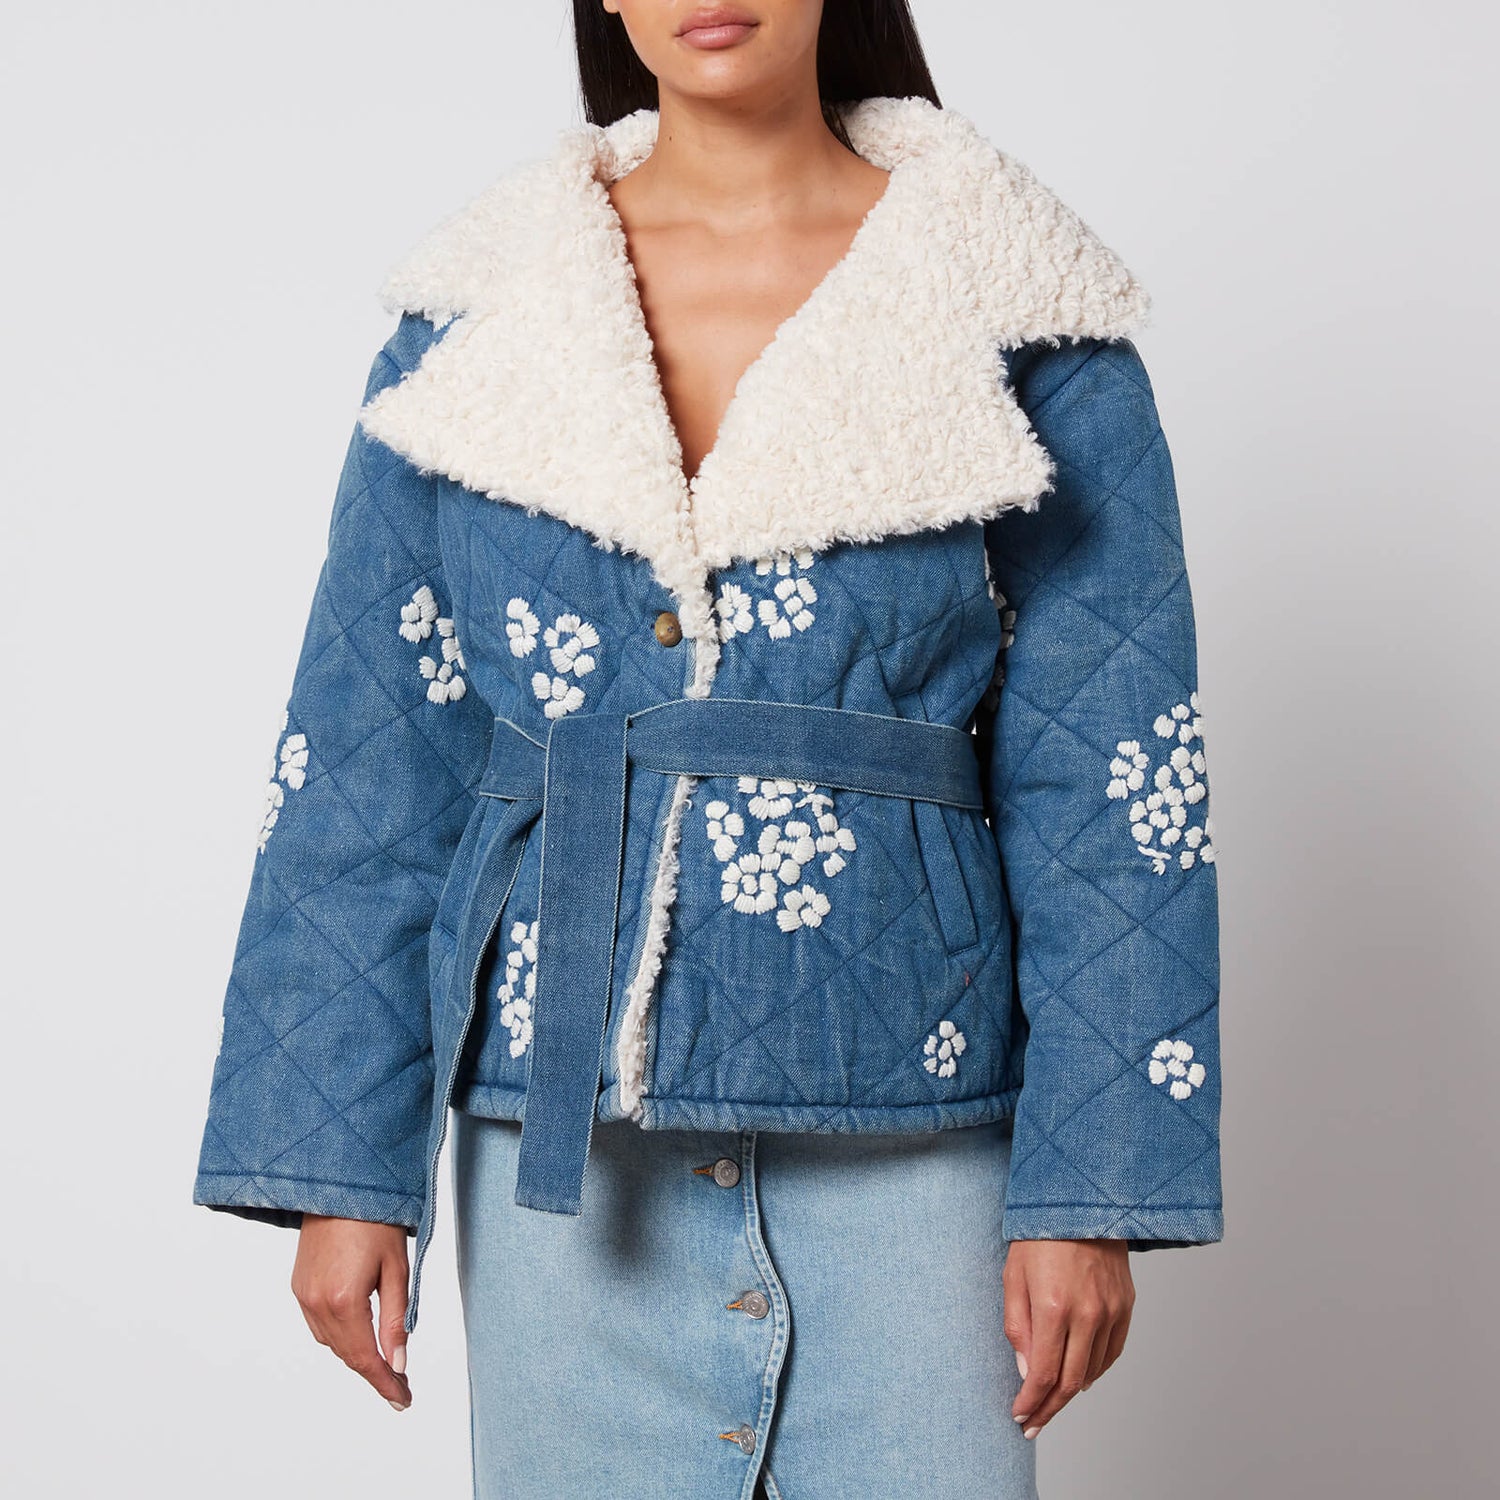 Tach Wilma Floral-Embrodiered Denim and Fleece Jacket - S